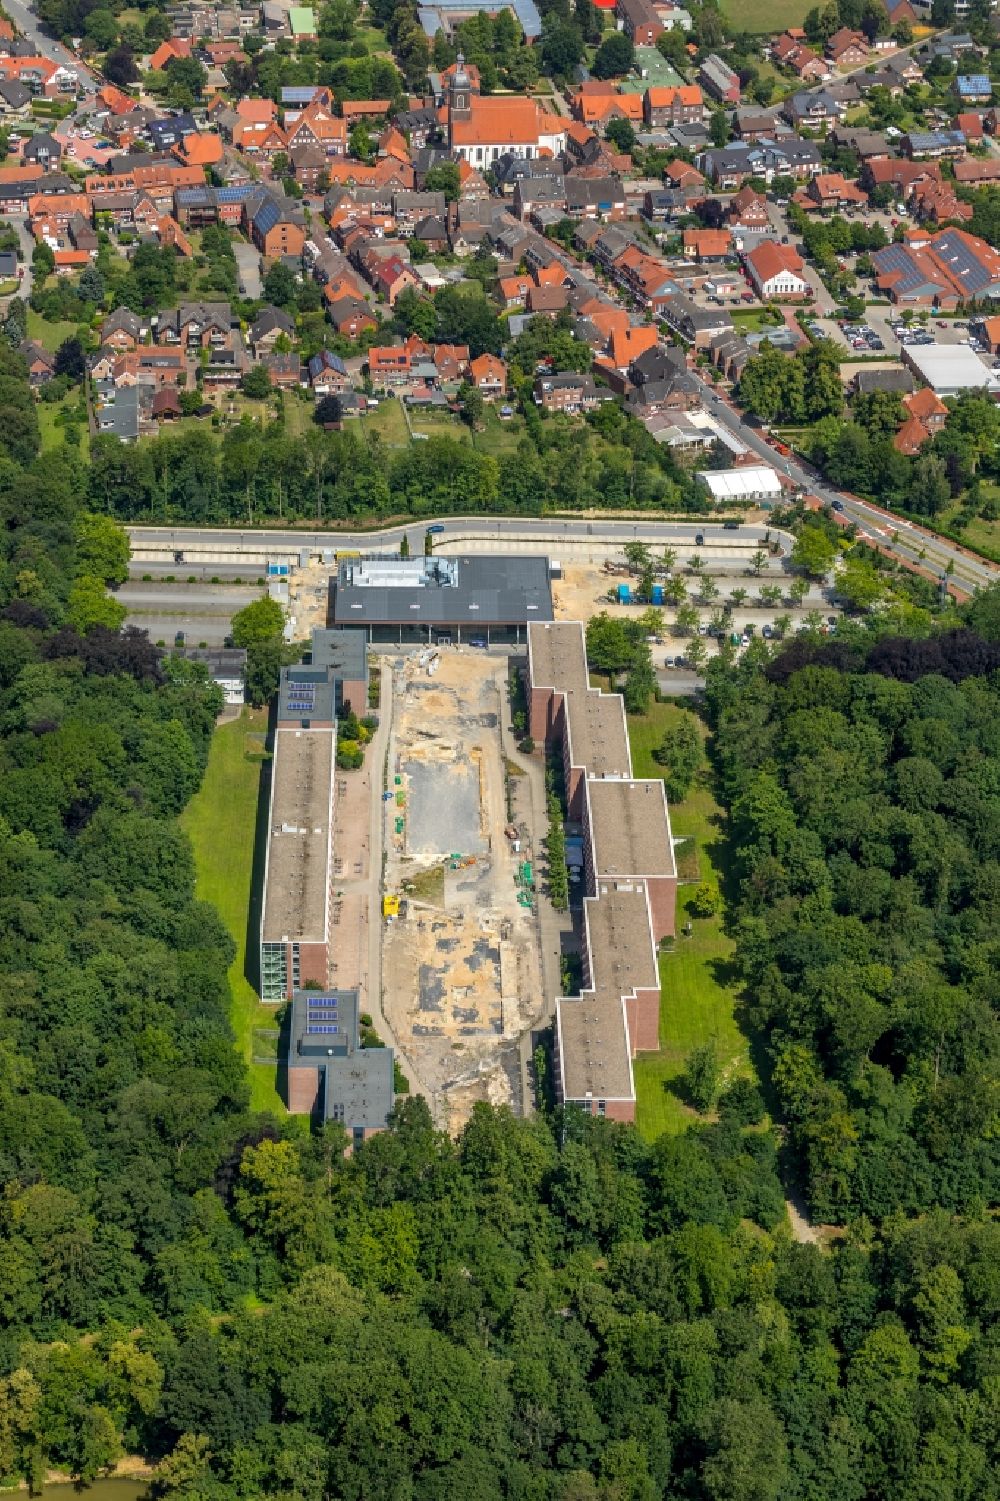 Aerial photograph Nordkirchen - Mensa - Aula- building on the campus of the University of Fachhochschule fuer Finanzen FHF in Nordkirchen in the state North Rhine-Westphalia, Germany